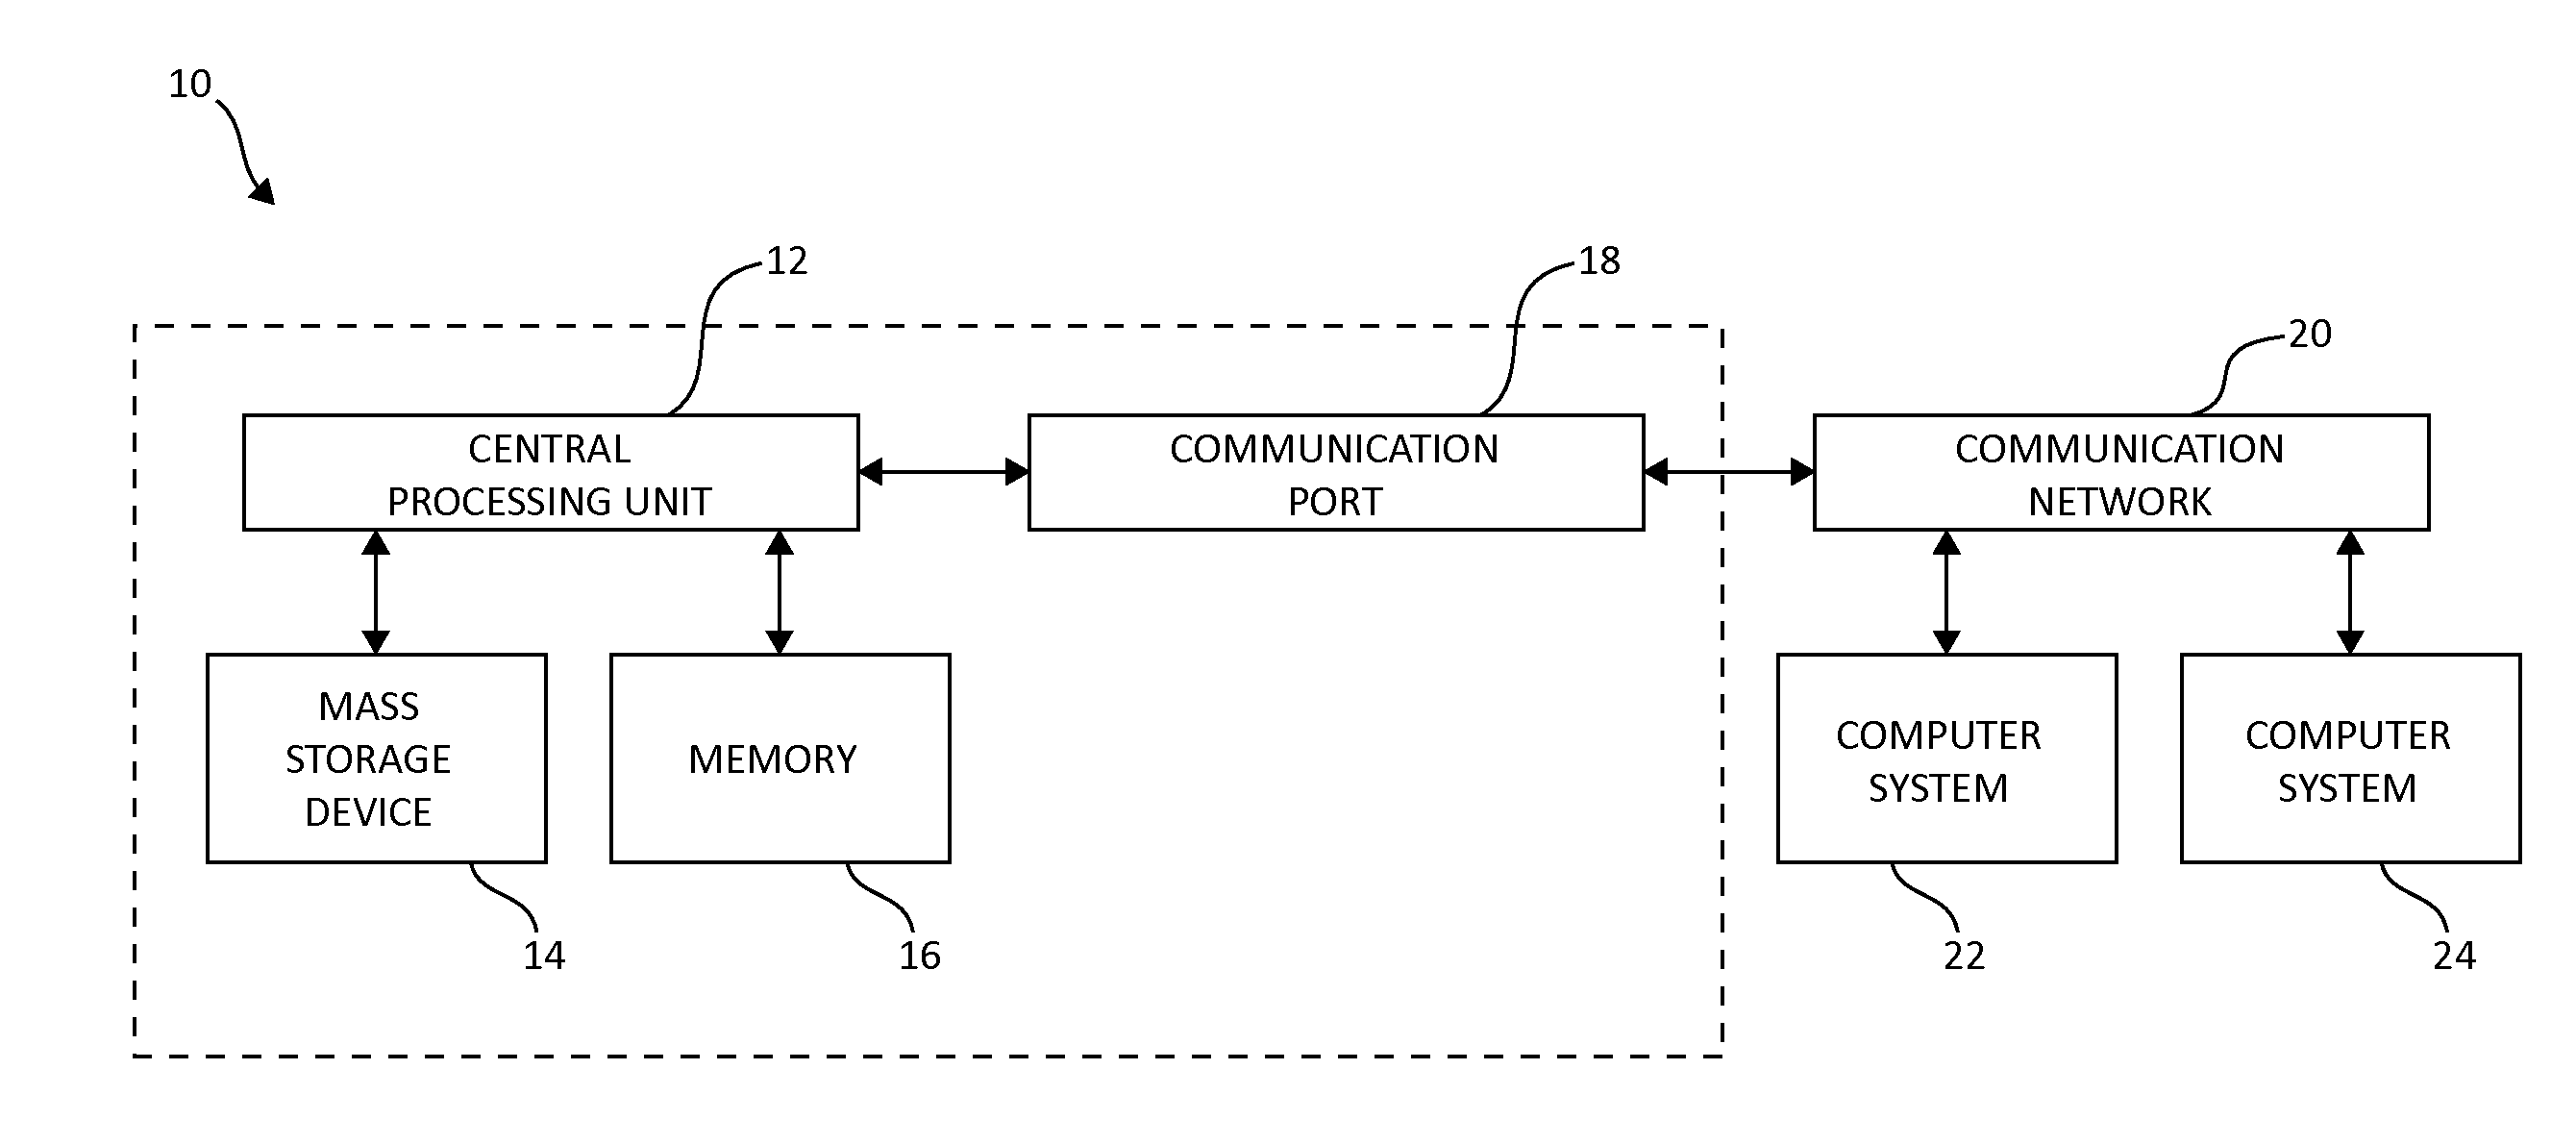 Address space management while switching optically-connected memory